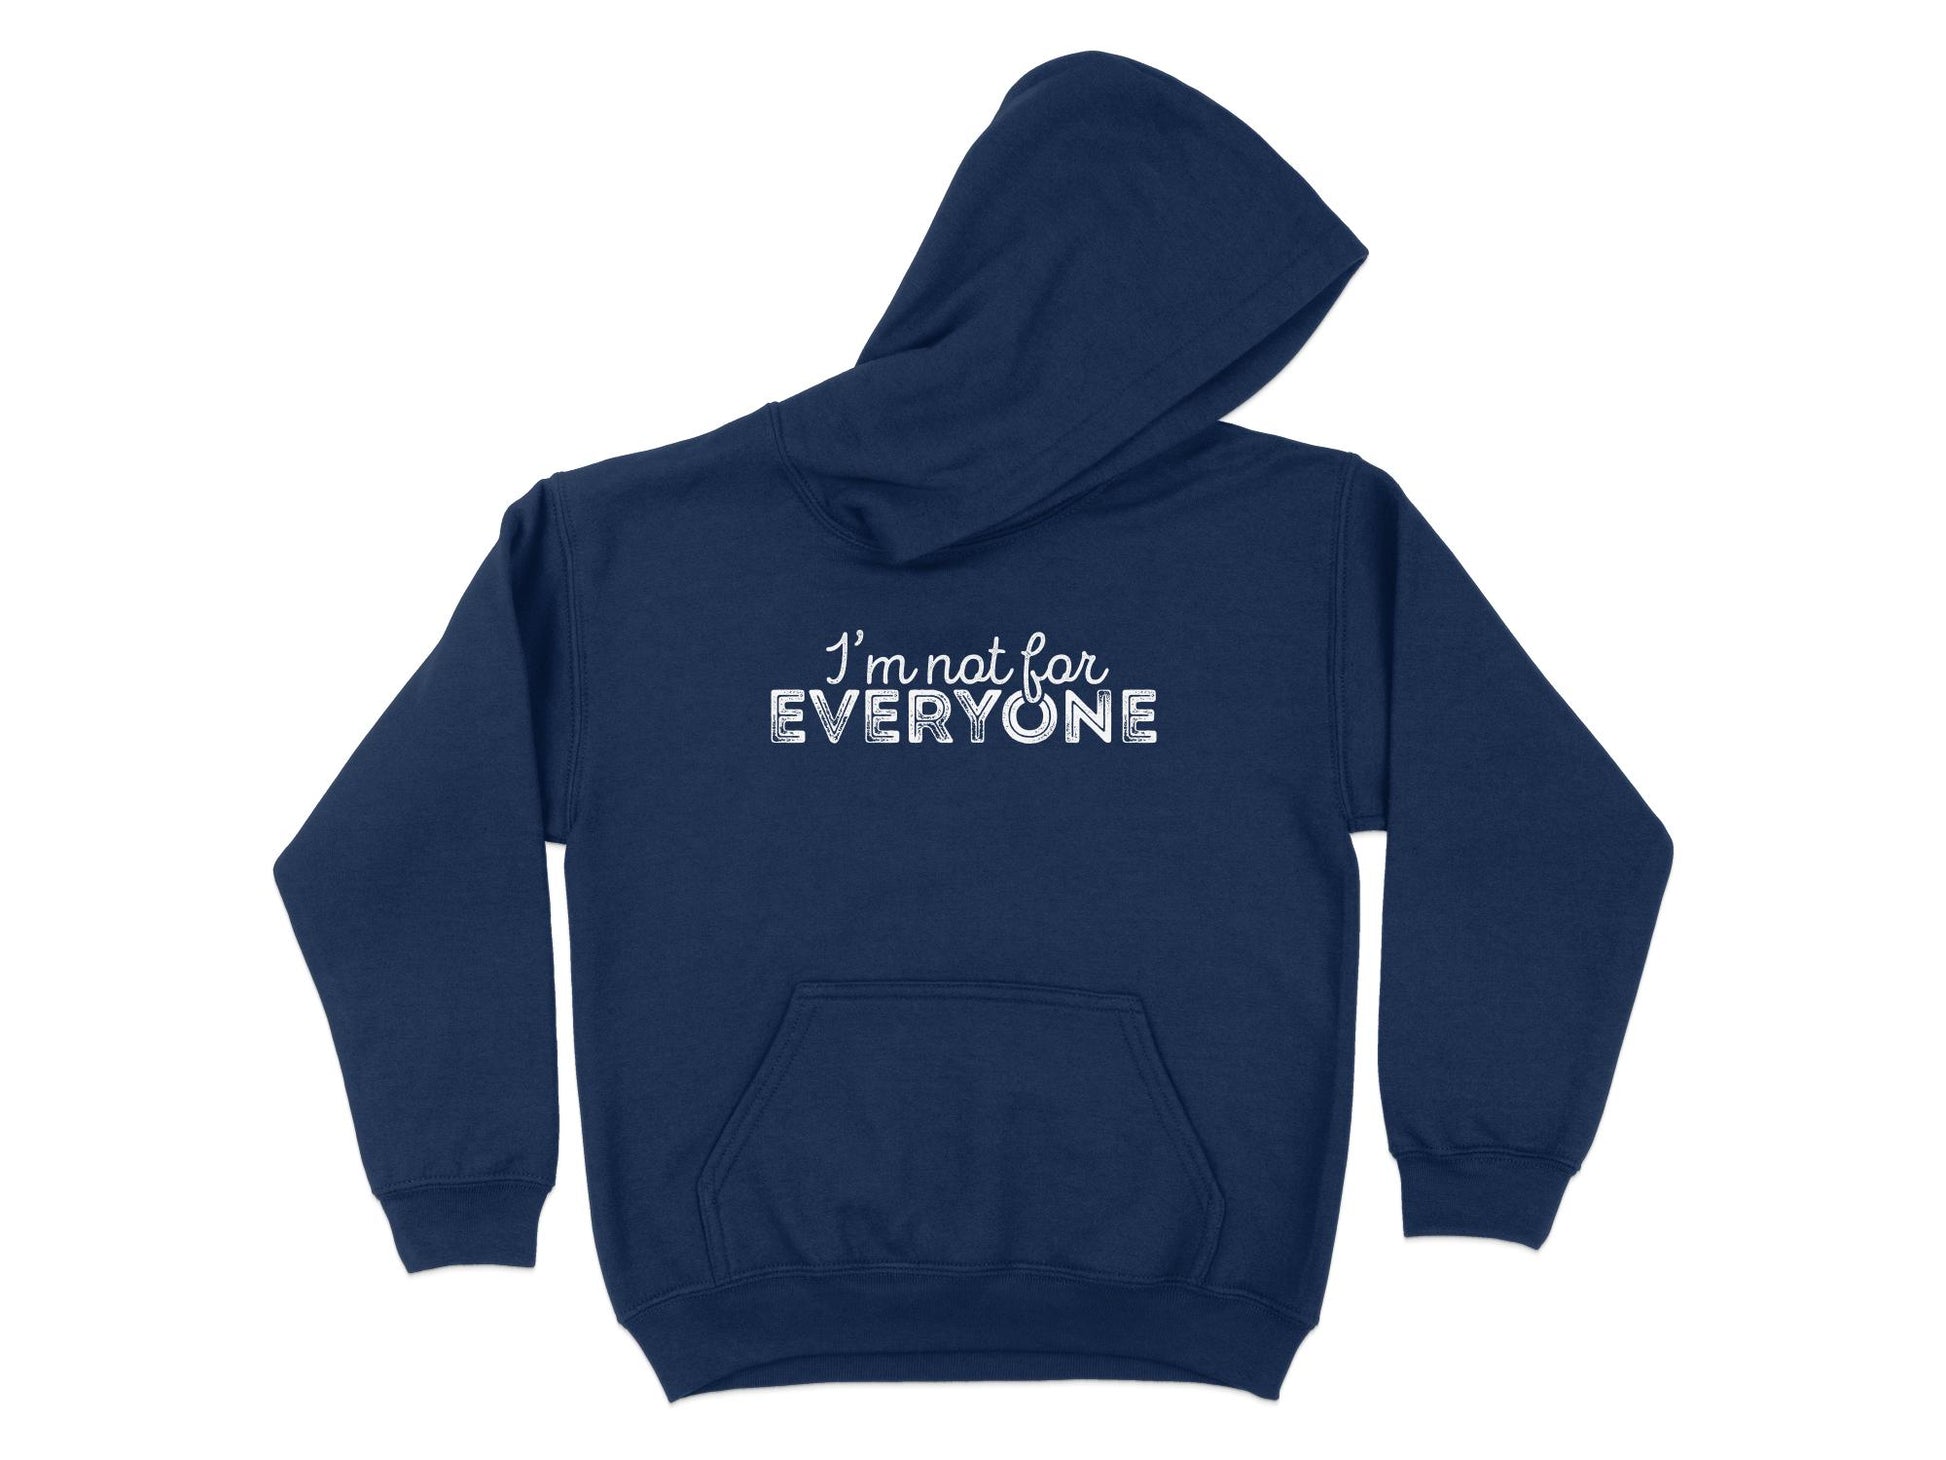 I'm Not For Everyone Hoodie, navy blue